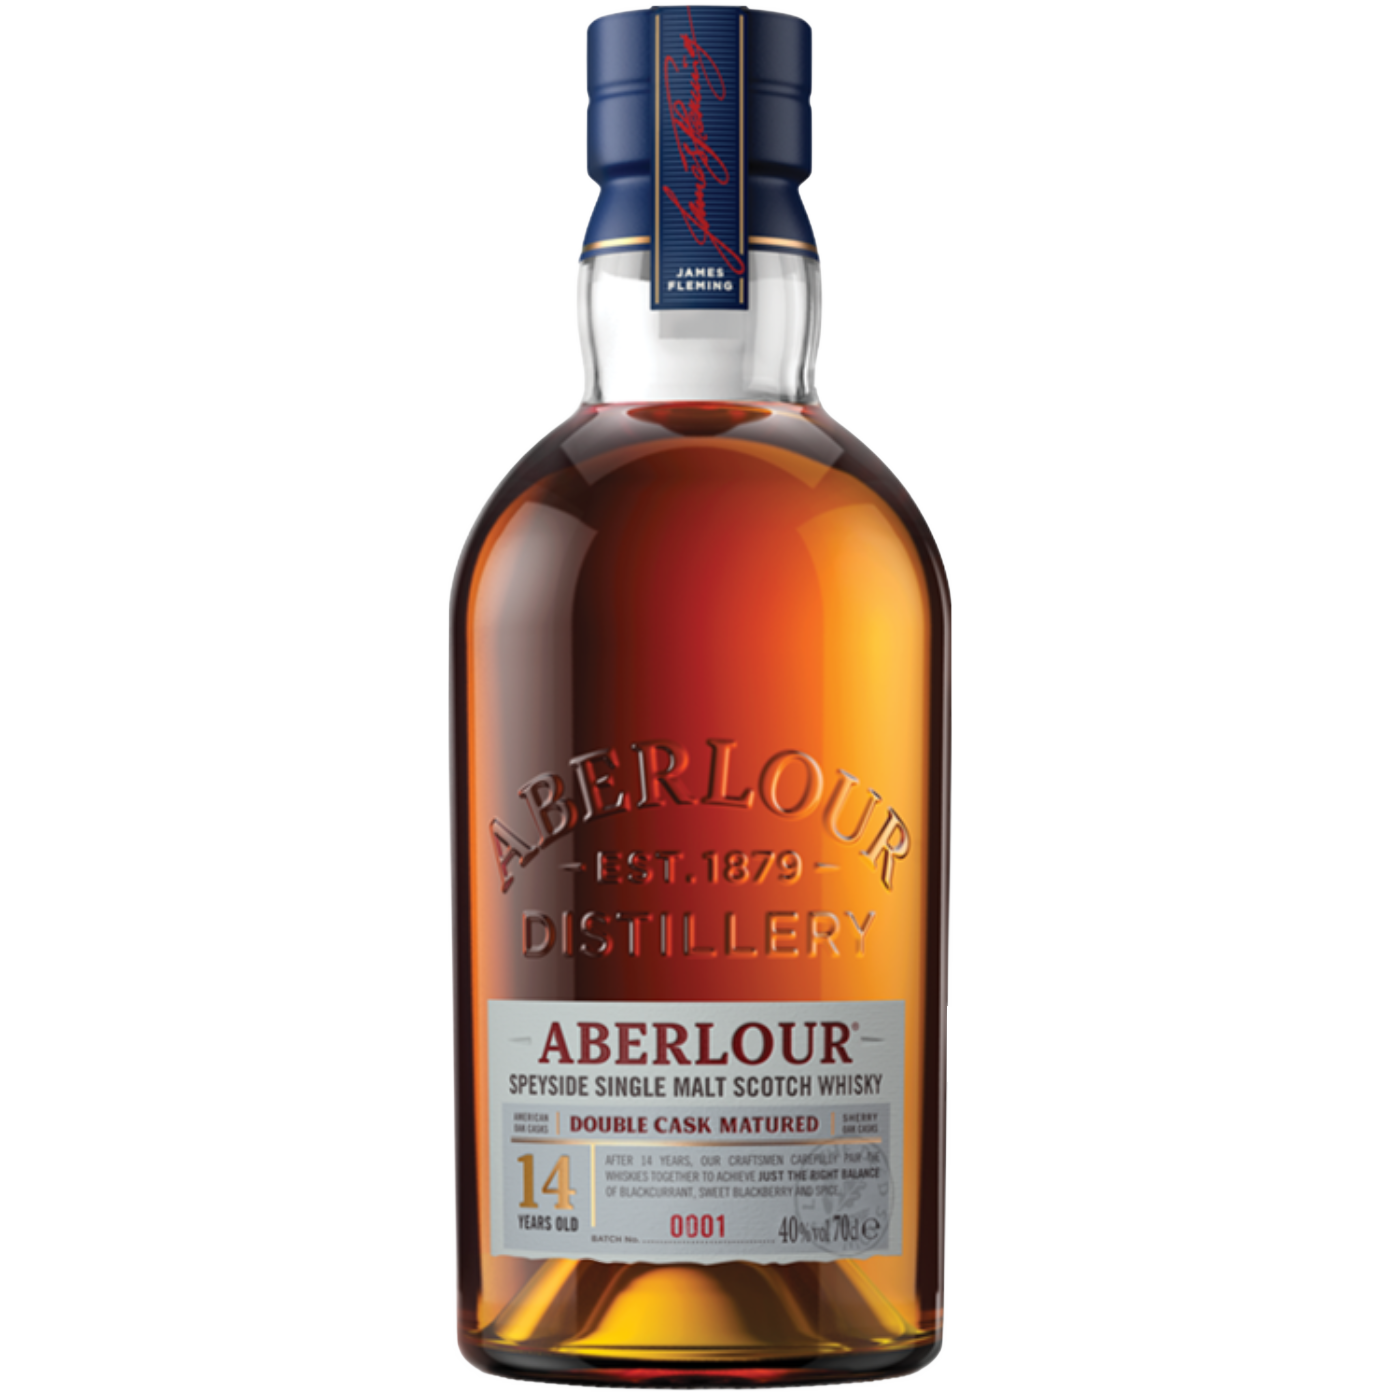 ABERLOUR 14 YEAR OLD DOUBLE CASK